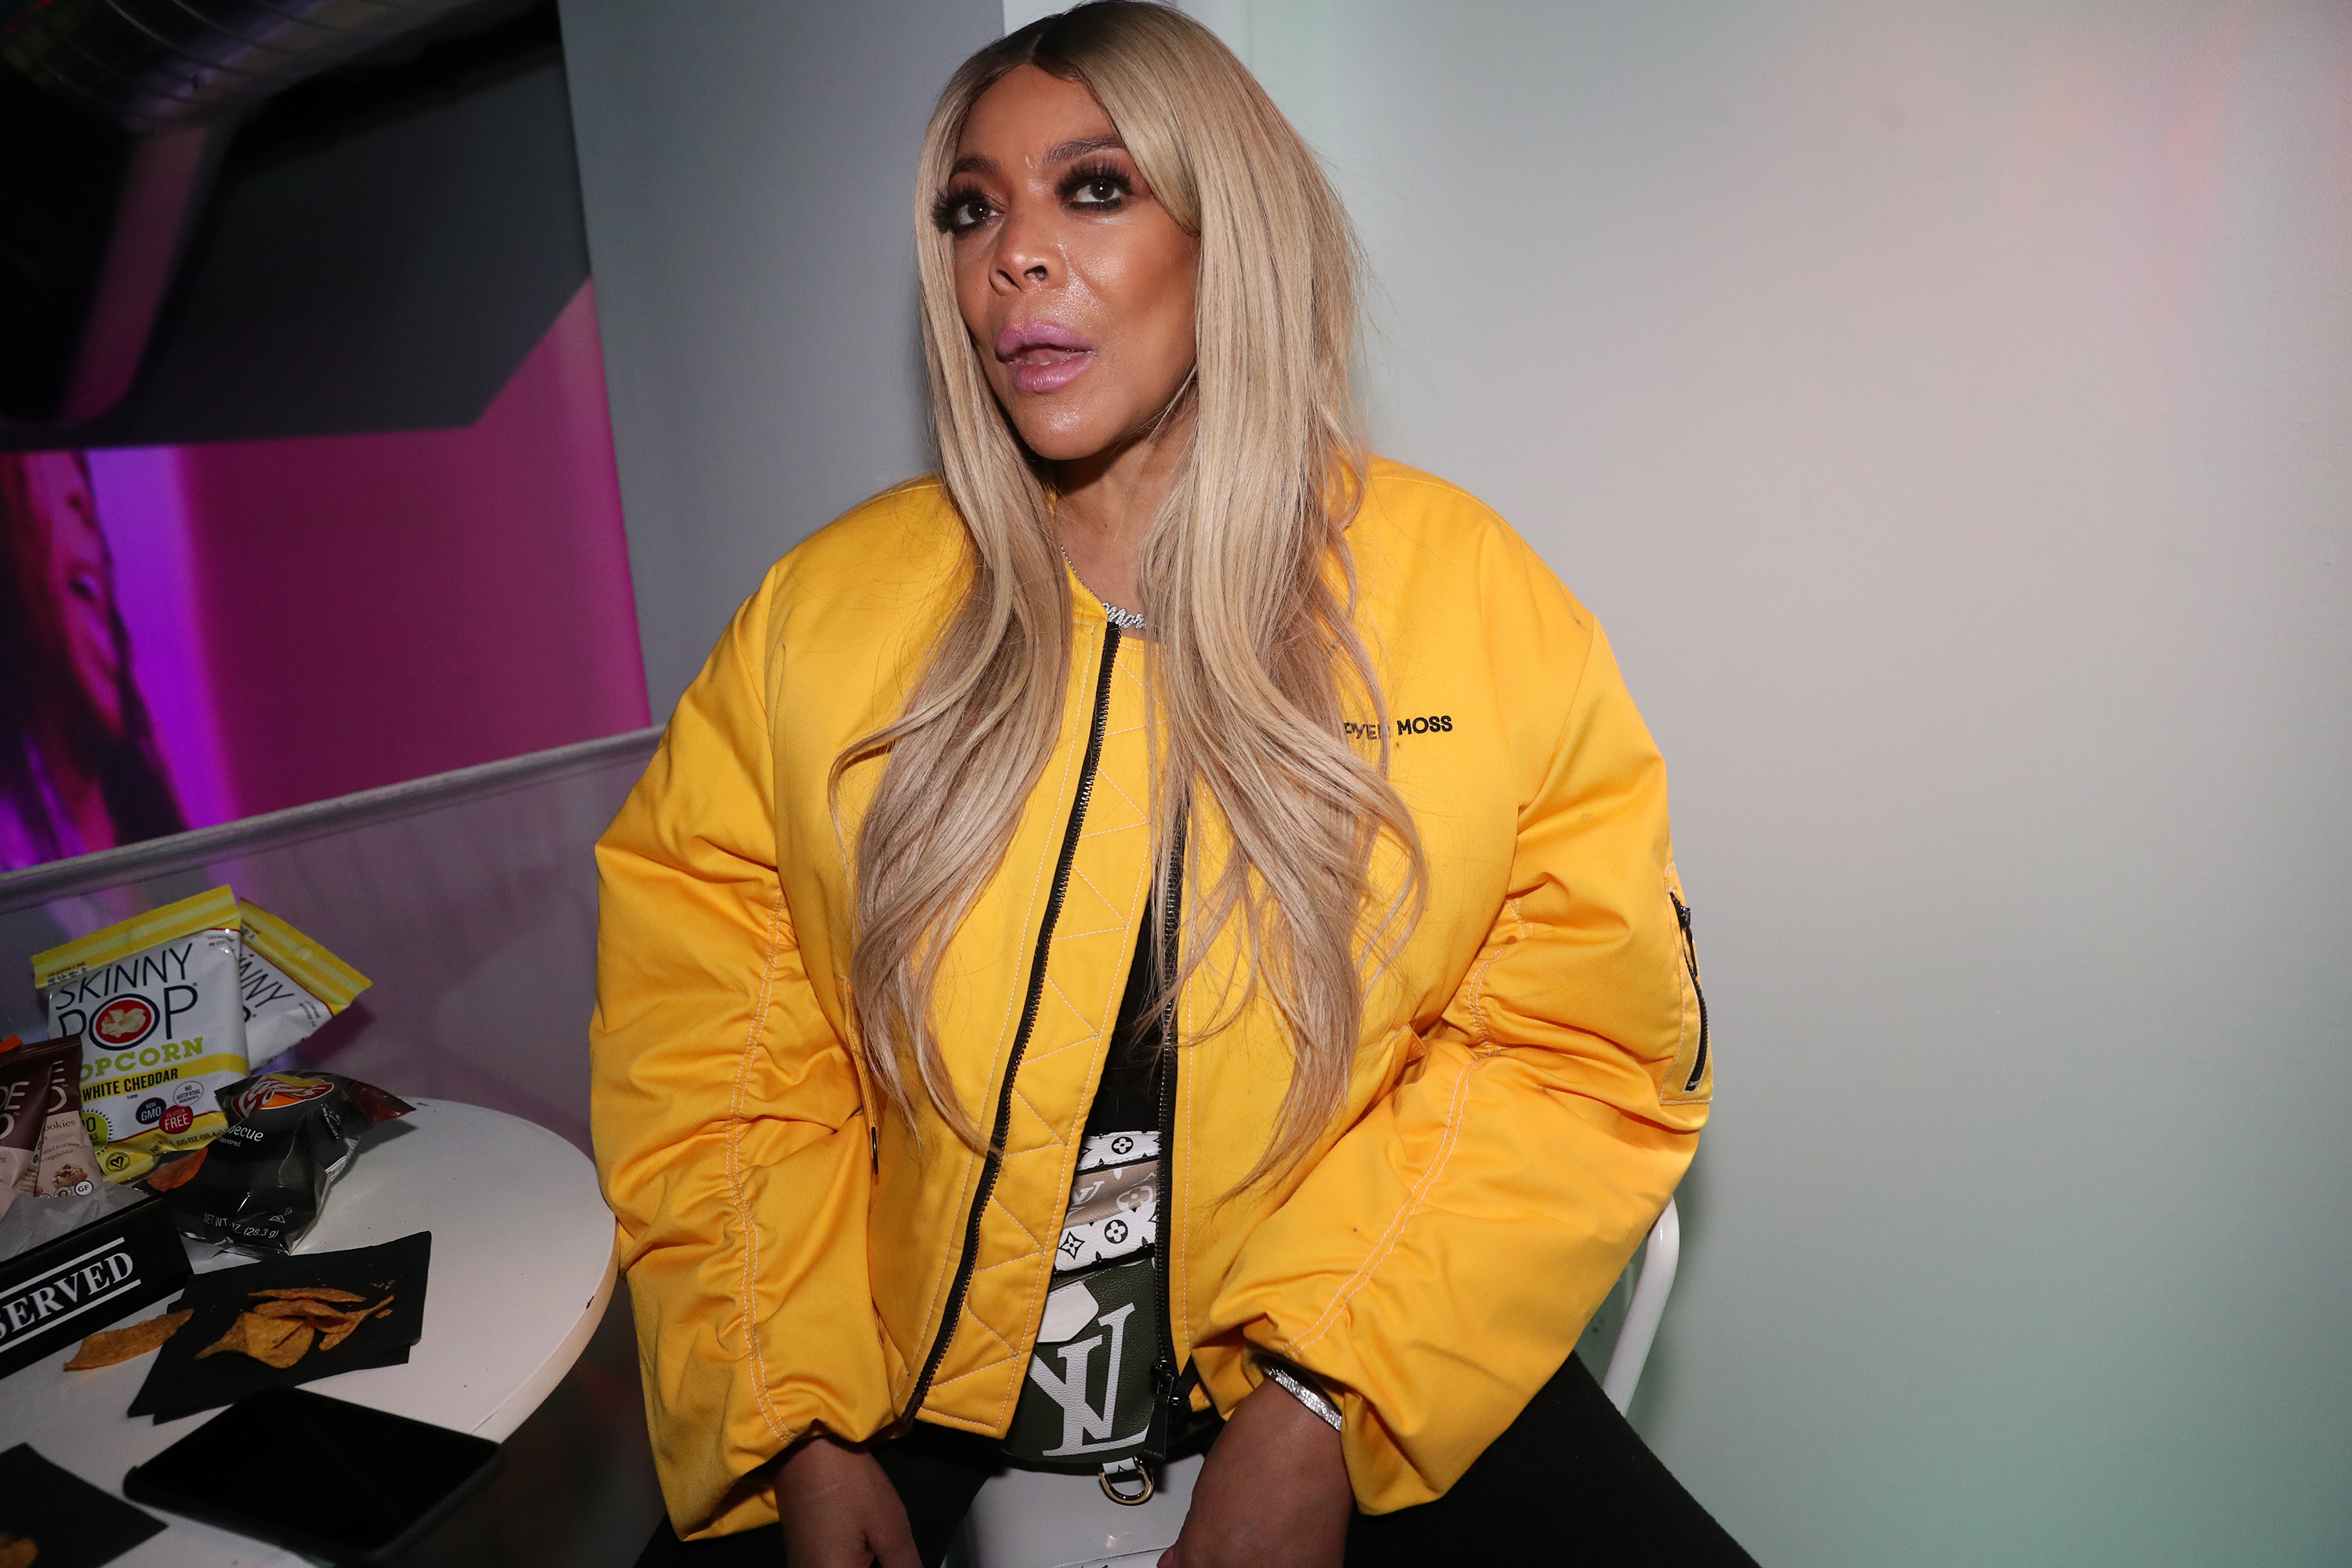 Wendy Williams in long straight blonde hair, wearing a yellow jacket